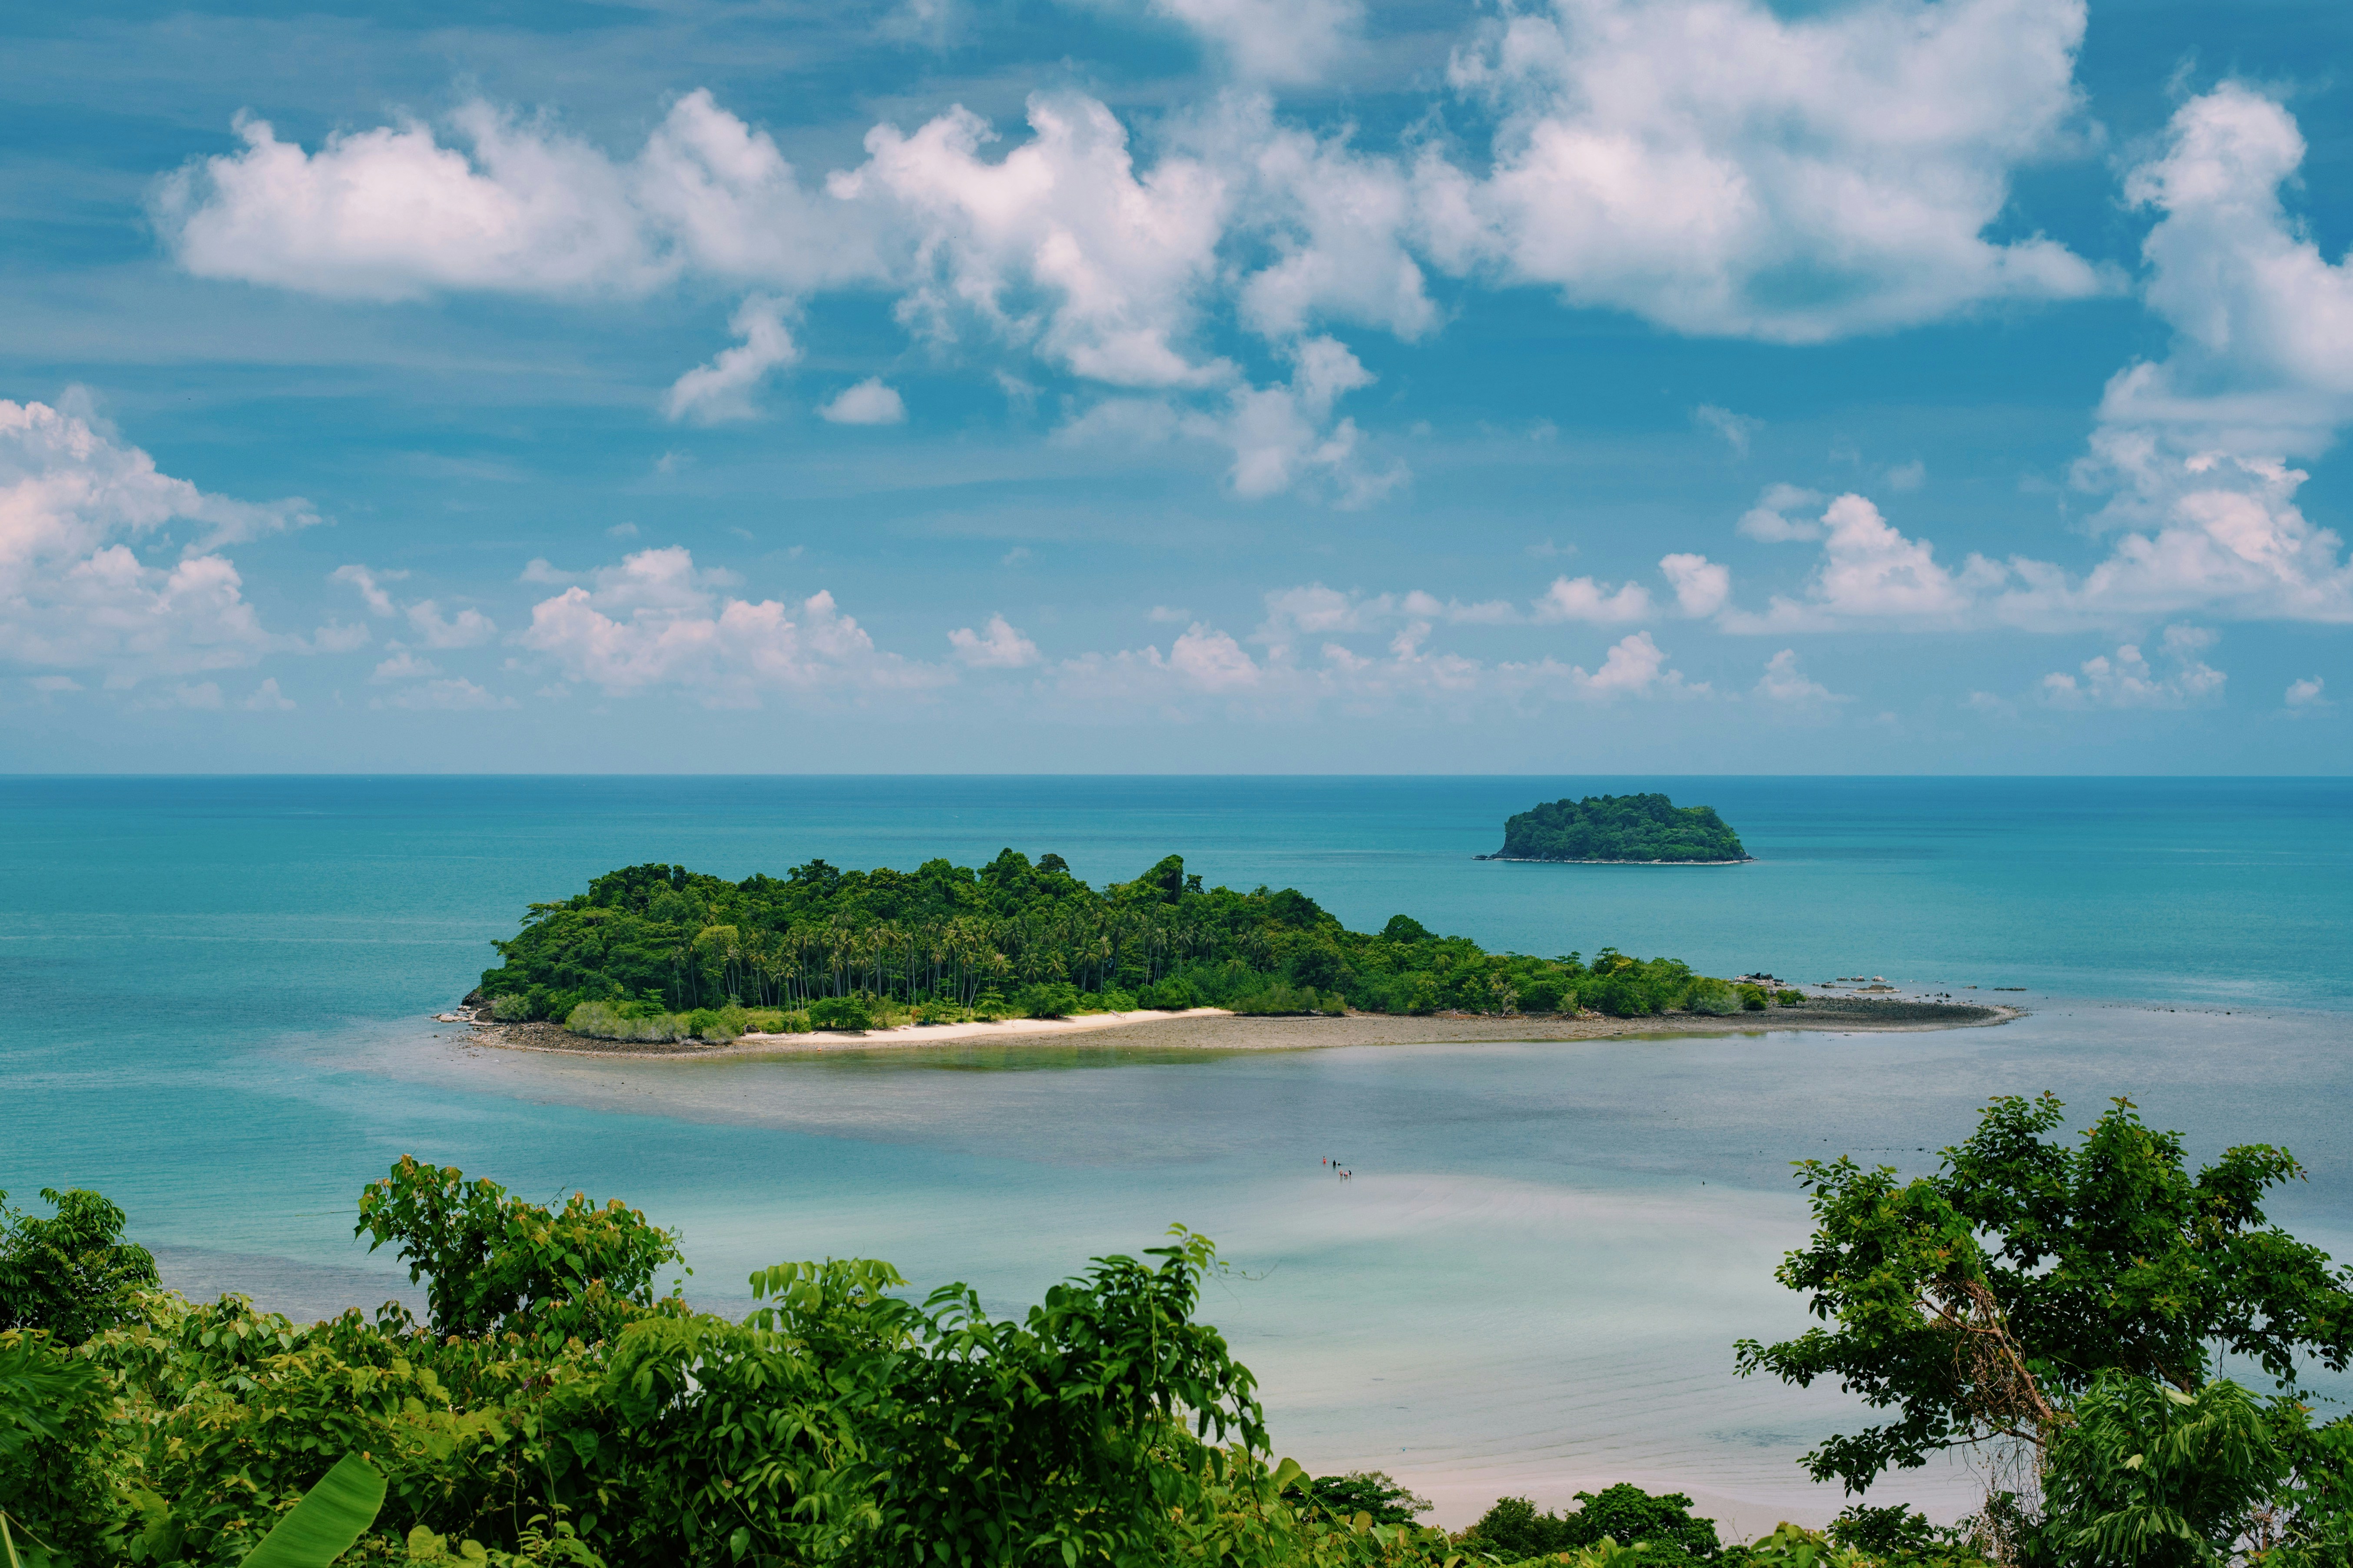 The Kai Bae viewpoint on Koh Chang is a must see on the island. I mean, look at this. You can even cross over the shallow parts to the tiny island below. Feels a little like the movie The Beach with DiCaprio, don’t you think? Would you dare to go explore the tiny island?